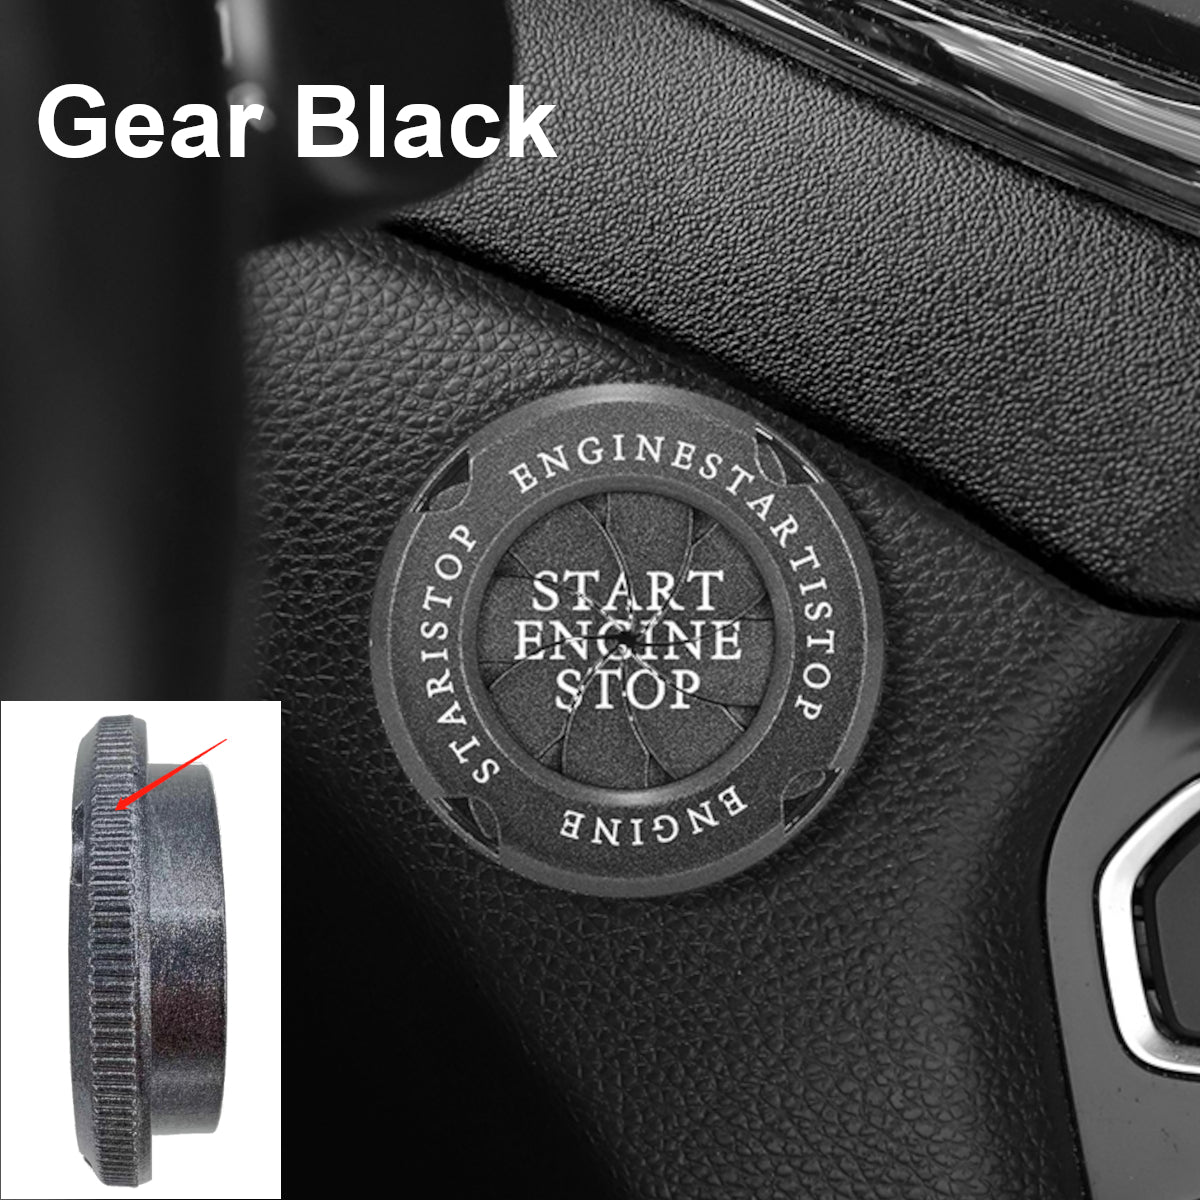 Engine Start Stop Button Cover